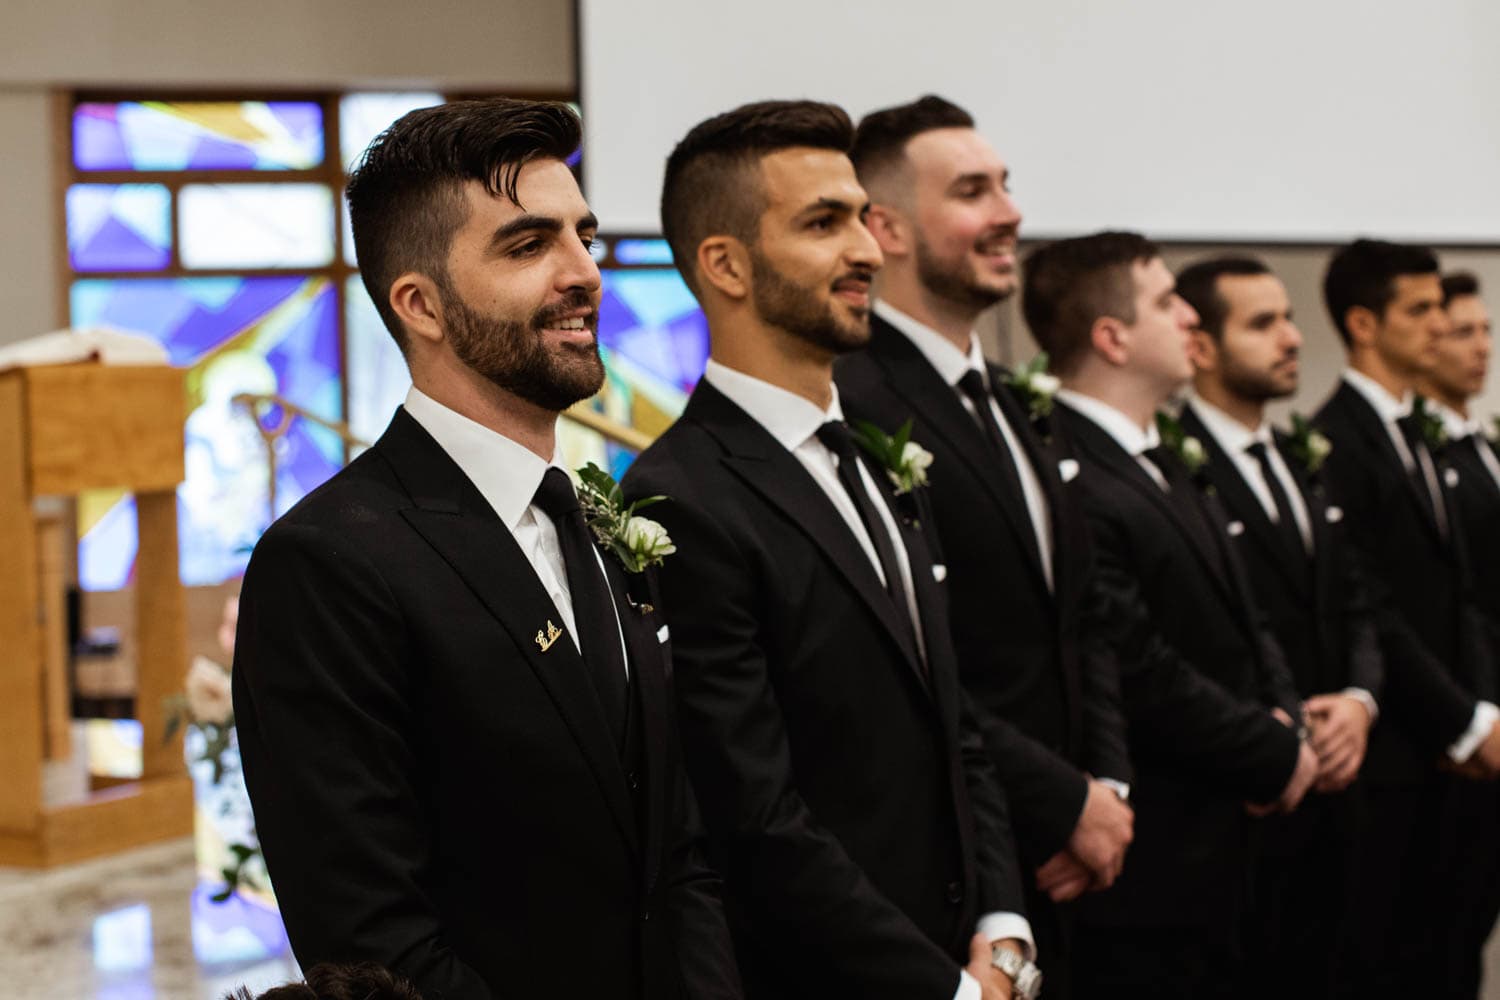 groomsmen at the alter